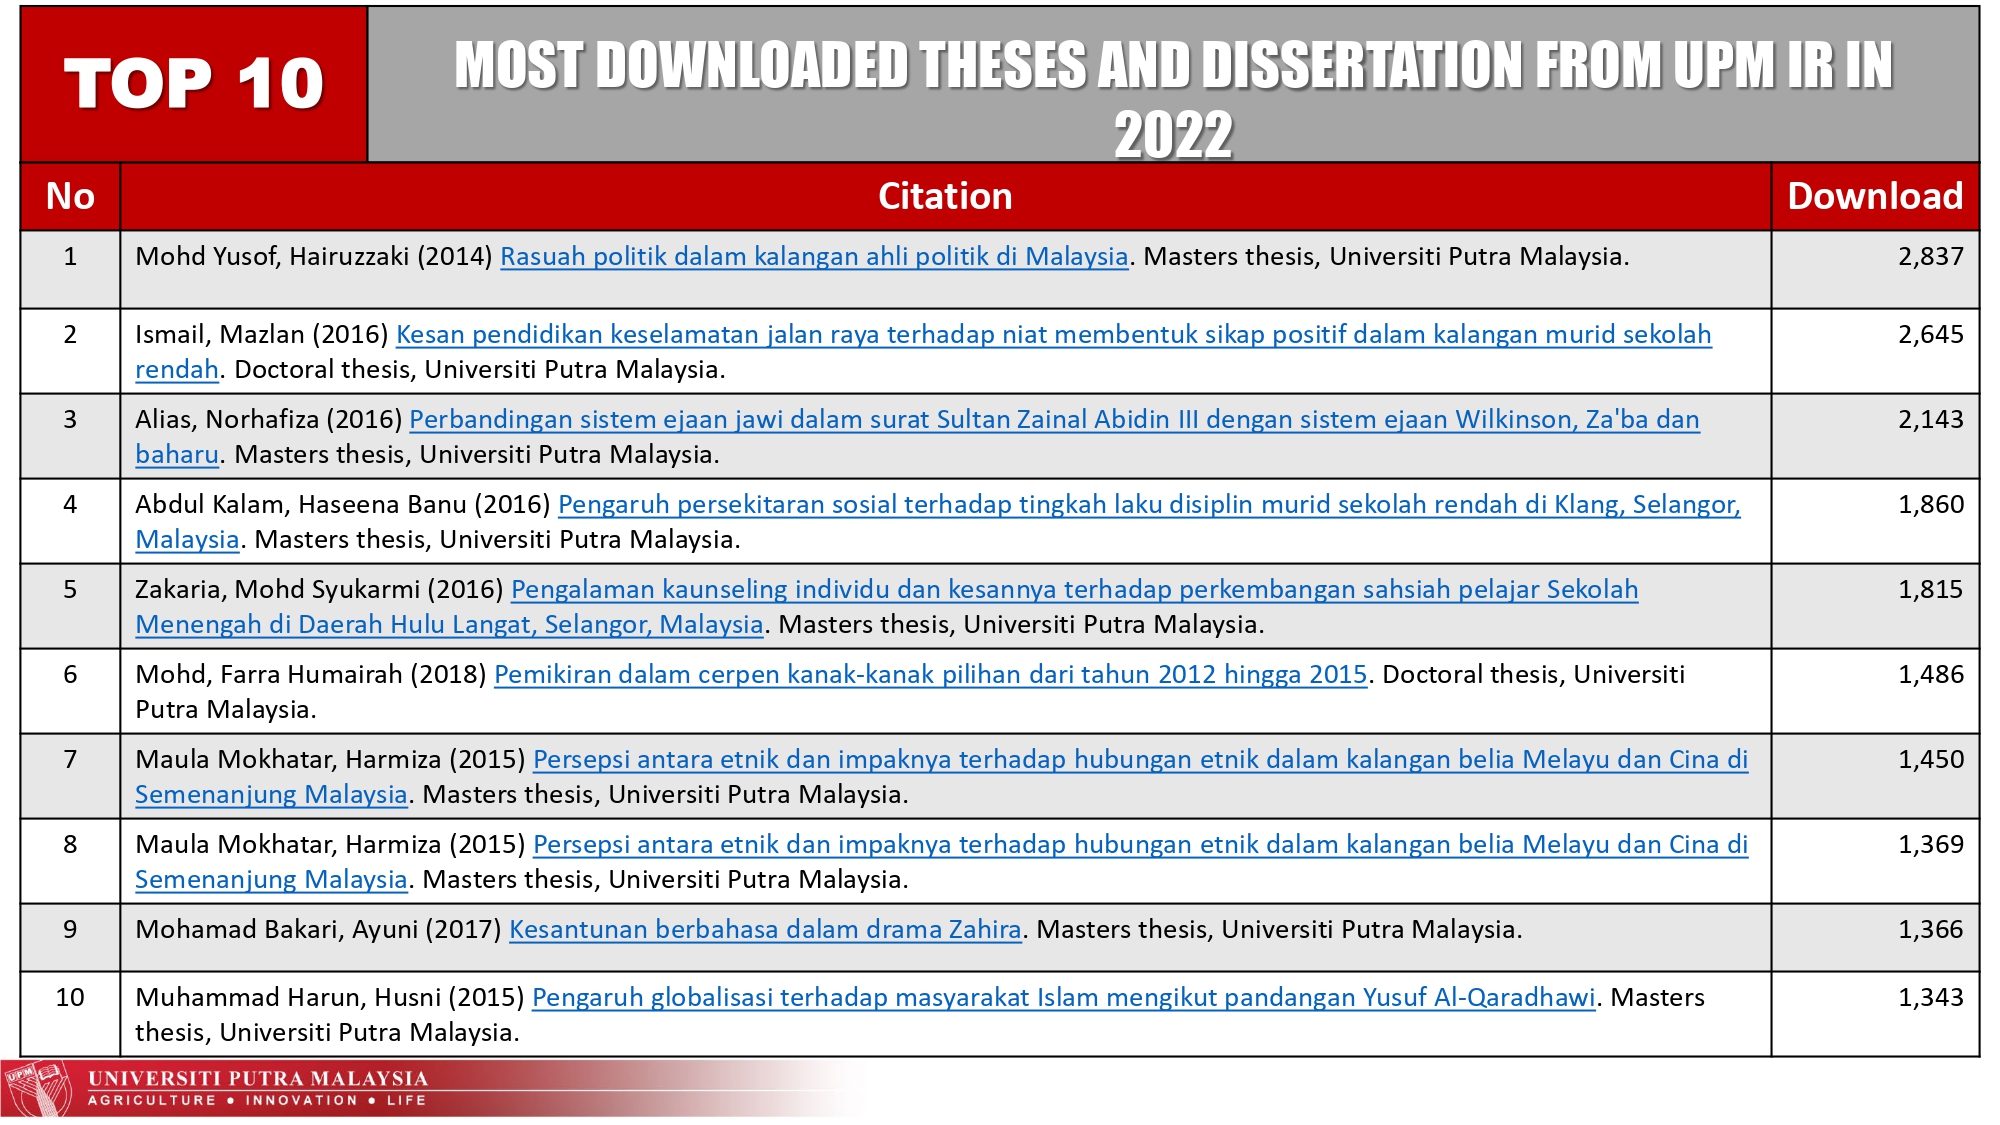 Top 10 most downloaded theses and dissertation in UPM IR in 2022